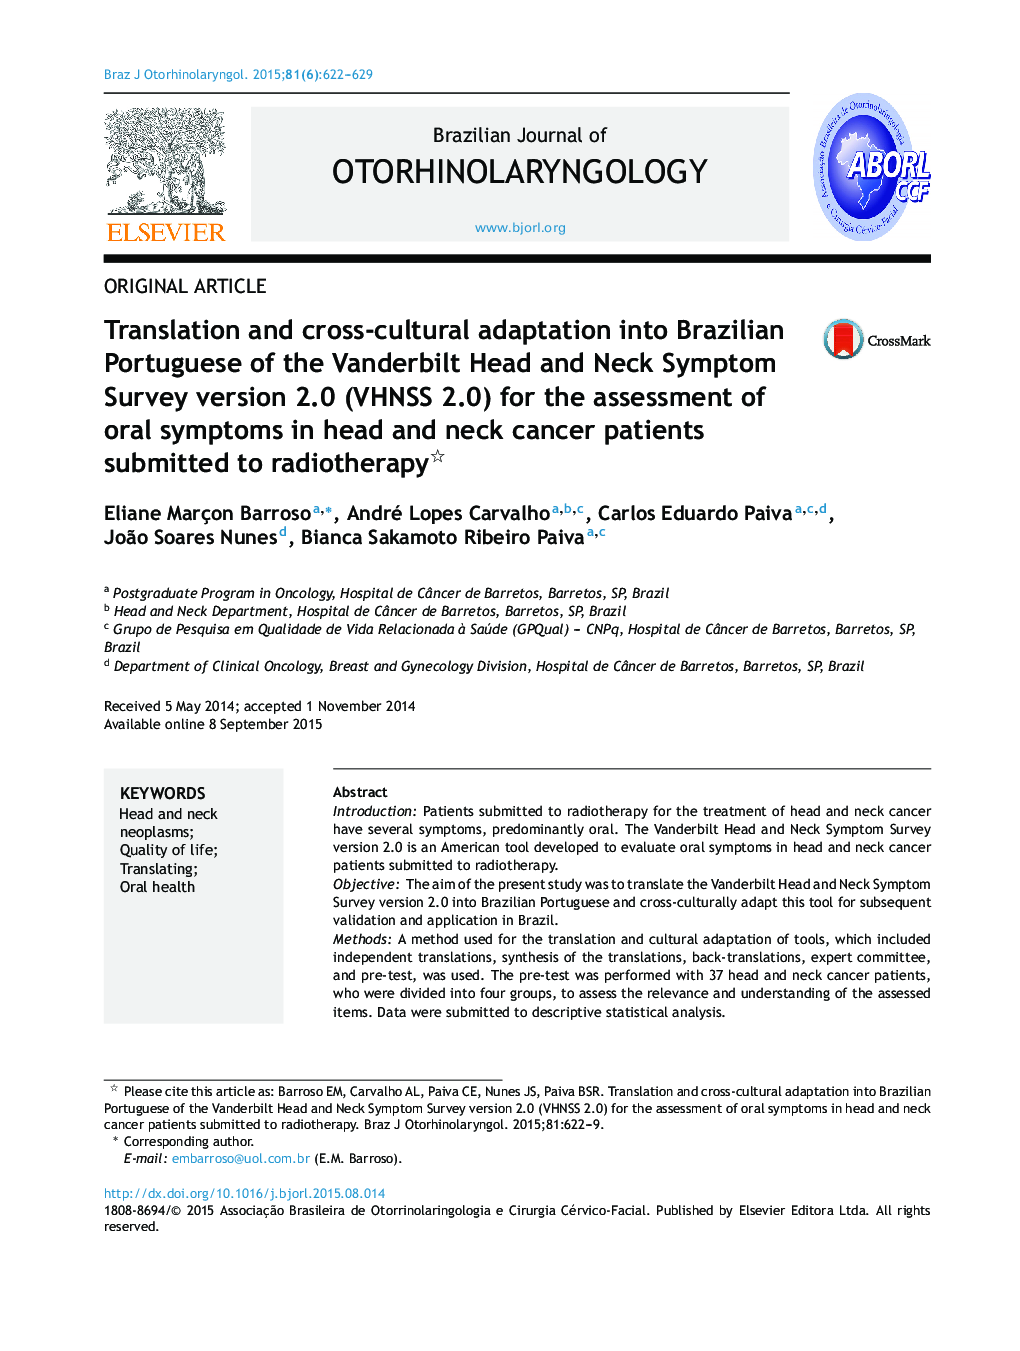 Translation and cross-cultural adaptation into Brazilian Portuguese of the Vanderbilt Head and Neck Symptom Survey version 2.0 (VHNSS 2.0) for the assessment of oral symptoms in head and neck cancer patients submitted to radiotherapy 